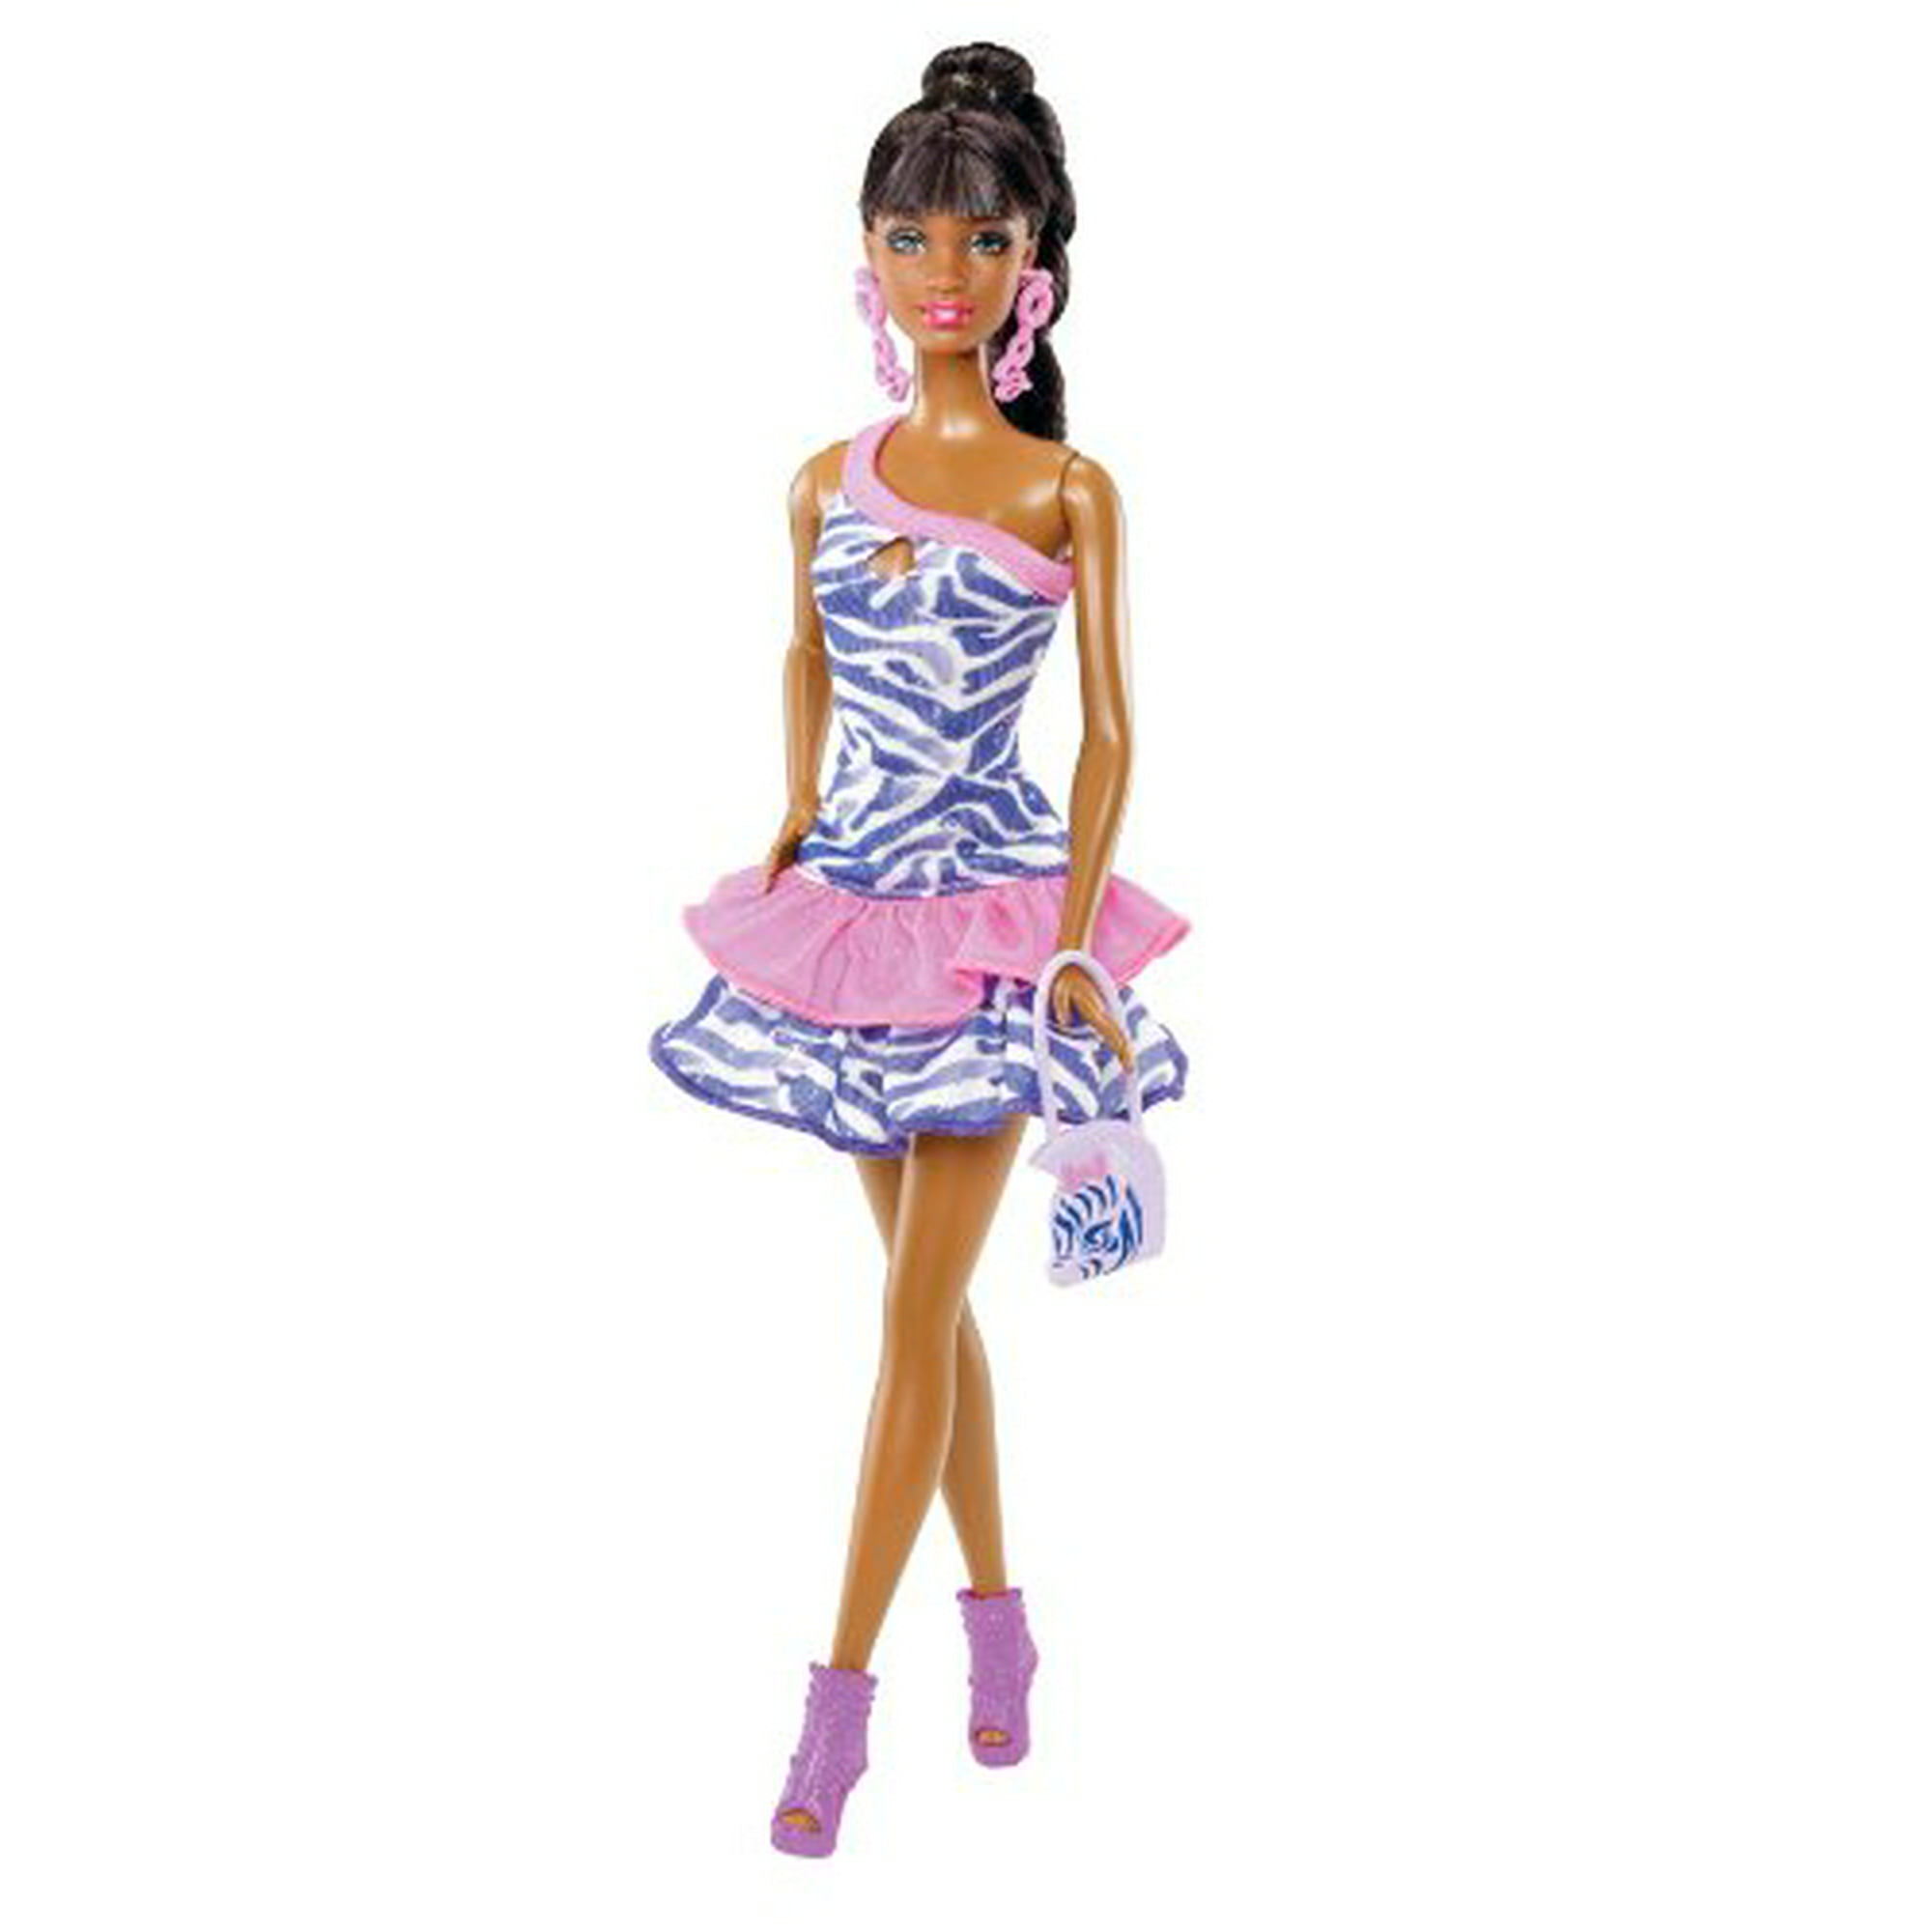 Barbie So in Style S.I.S. grace Fashion Doll